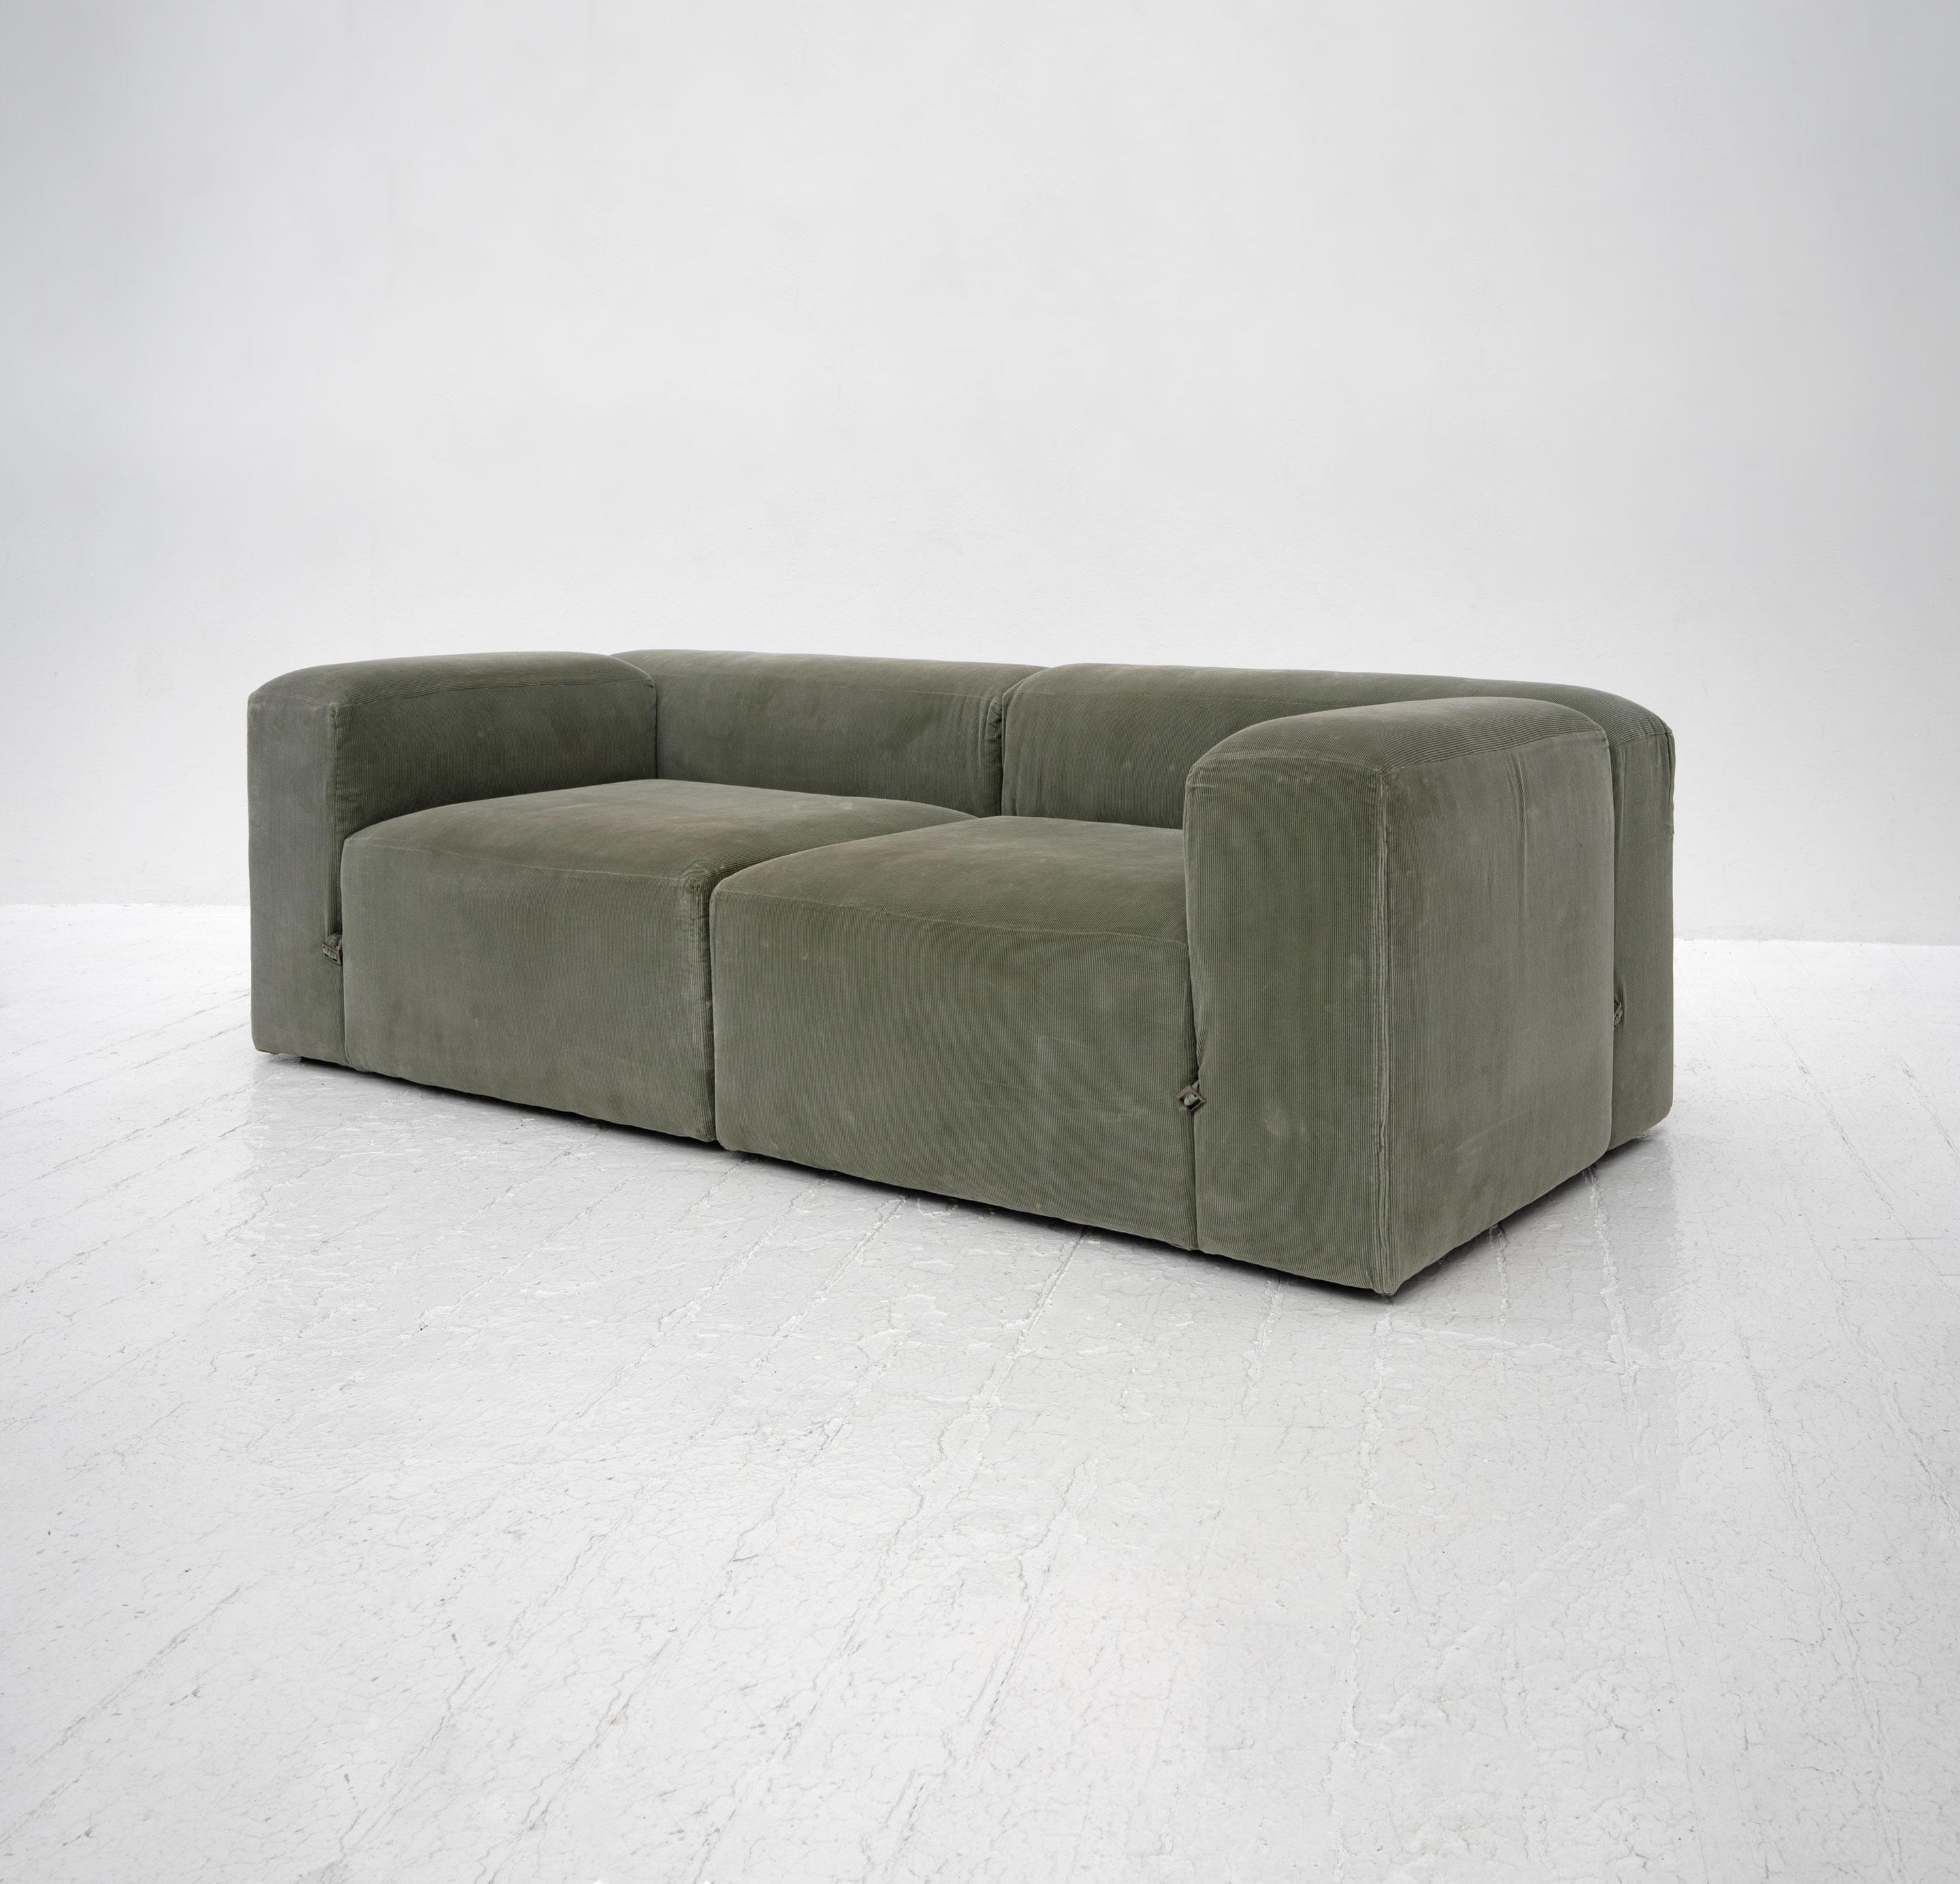 A late 20th Century modular sofa upholstered in soft green corduroy and featuring strap and buckle detailing after Mario Bellini's Le Mura.

Dimensions (cm, approx):
Height: 66
Width: 226
Depth: 97

In good condition for its year with no rips to the